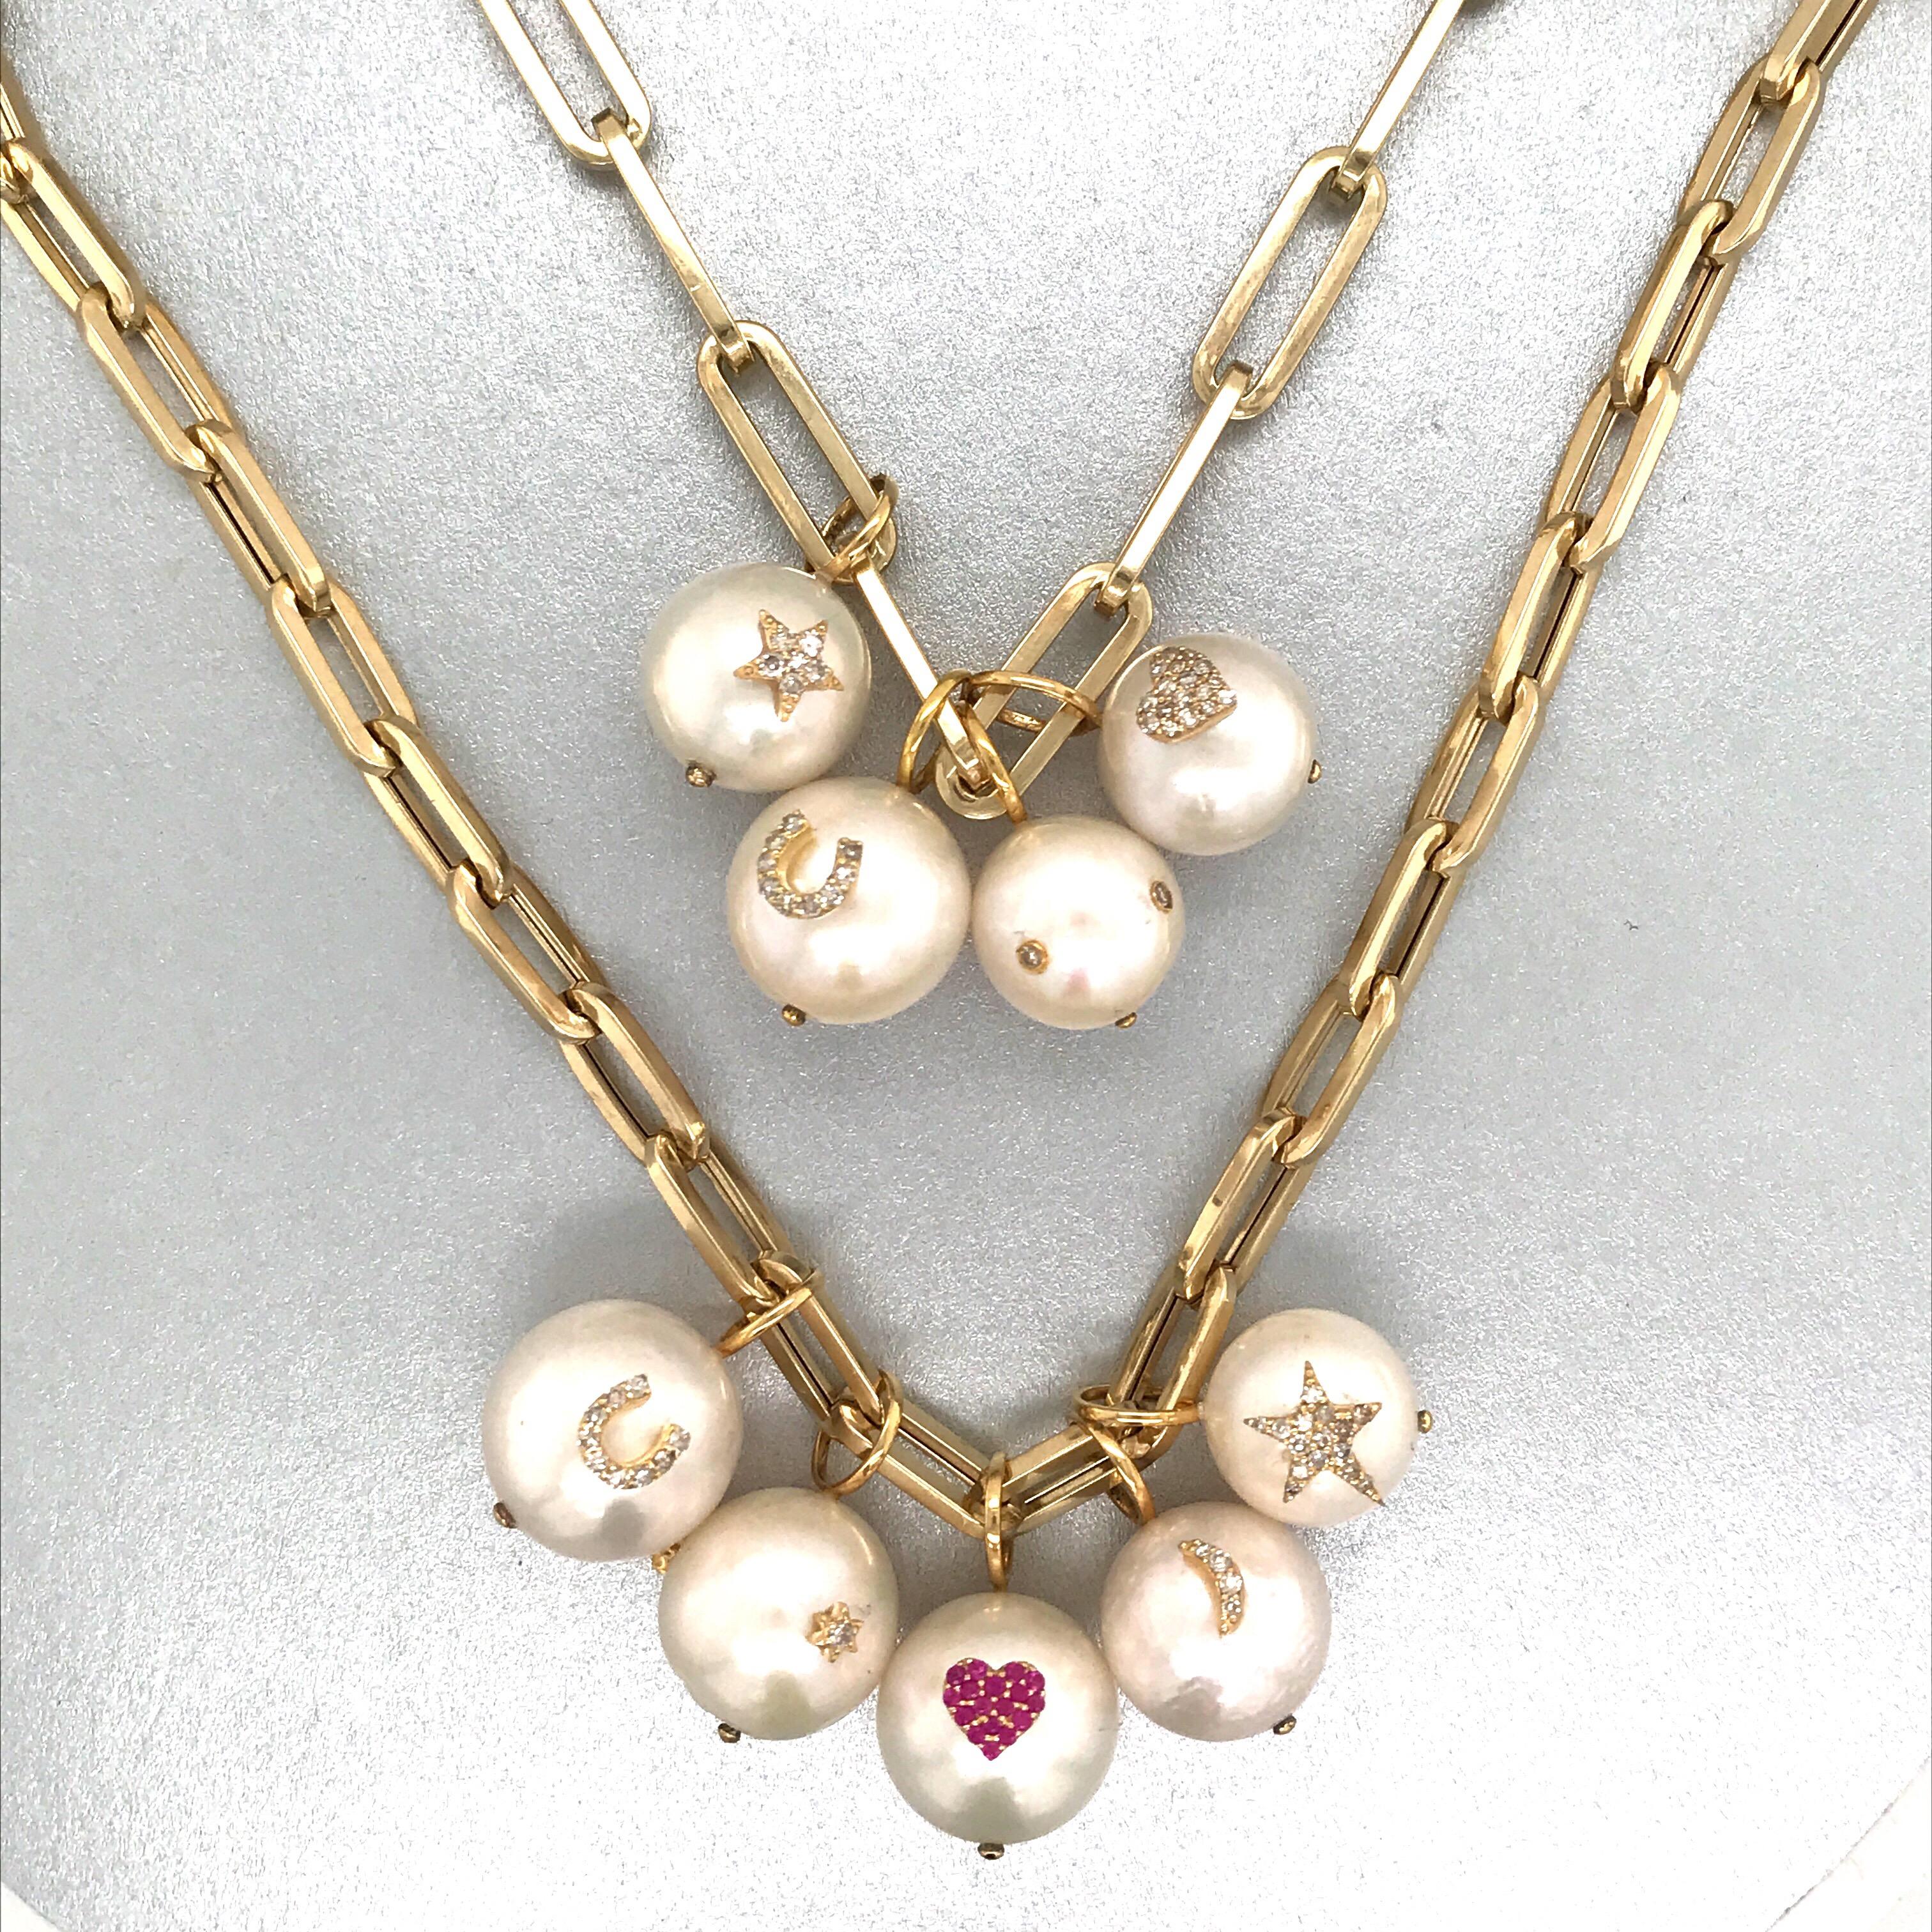 14K Yellow gold link necklace featuring pearl charms of stars, moons, hearts, horse shoe, and diamonds.
Charms can be purchased individually. Email for specific pricing. 
Do not have to purchase necklace, only charms. 

Customize your own stack!